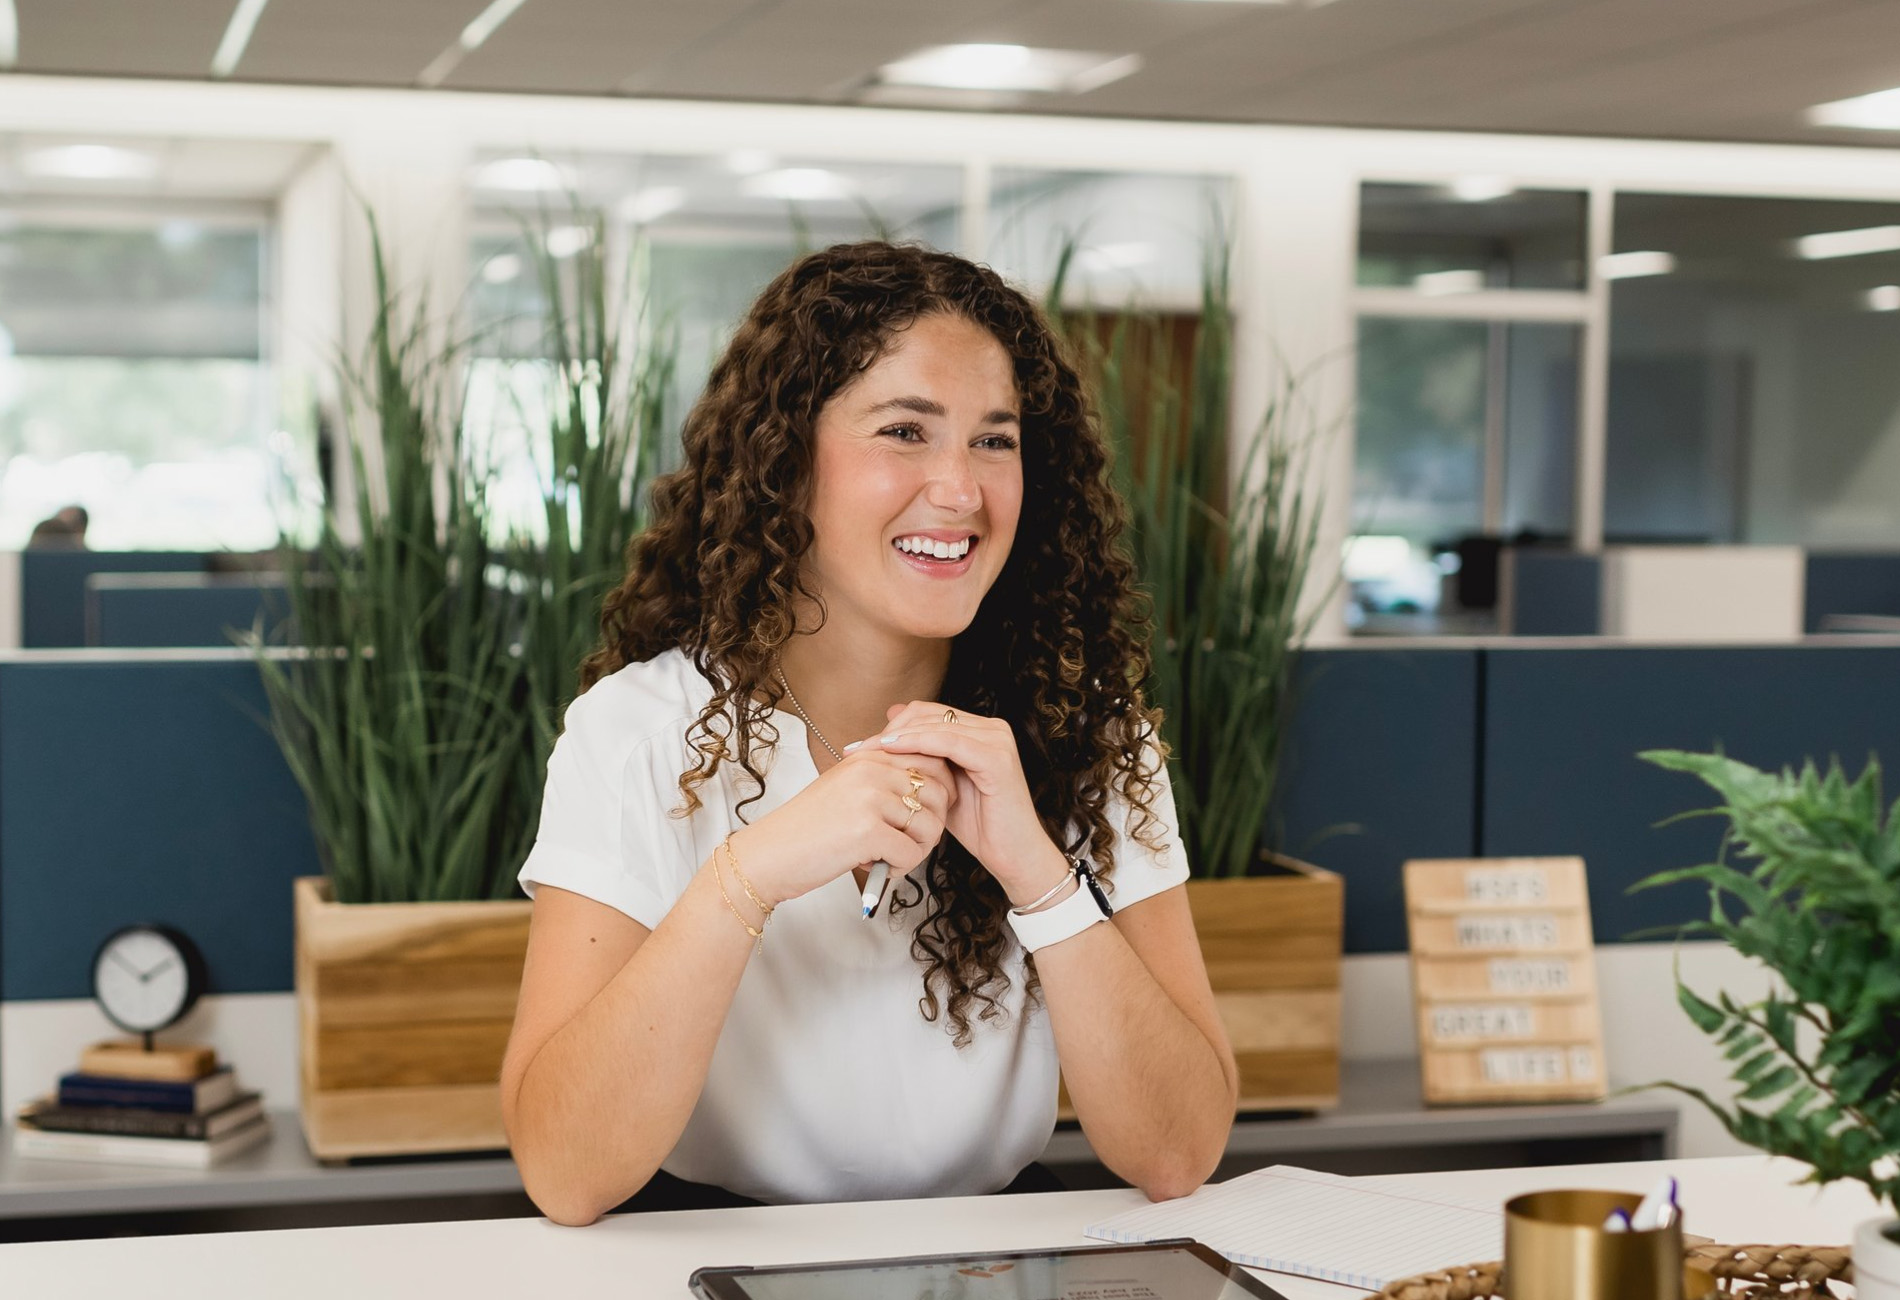 Sophia Tsoupelis, Associate Financial Advisor: A young woman with brown curly hair wearing a white blouse and sitting at a work table.